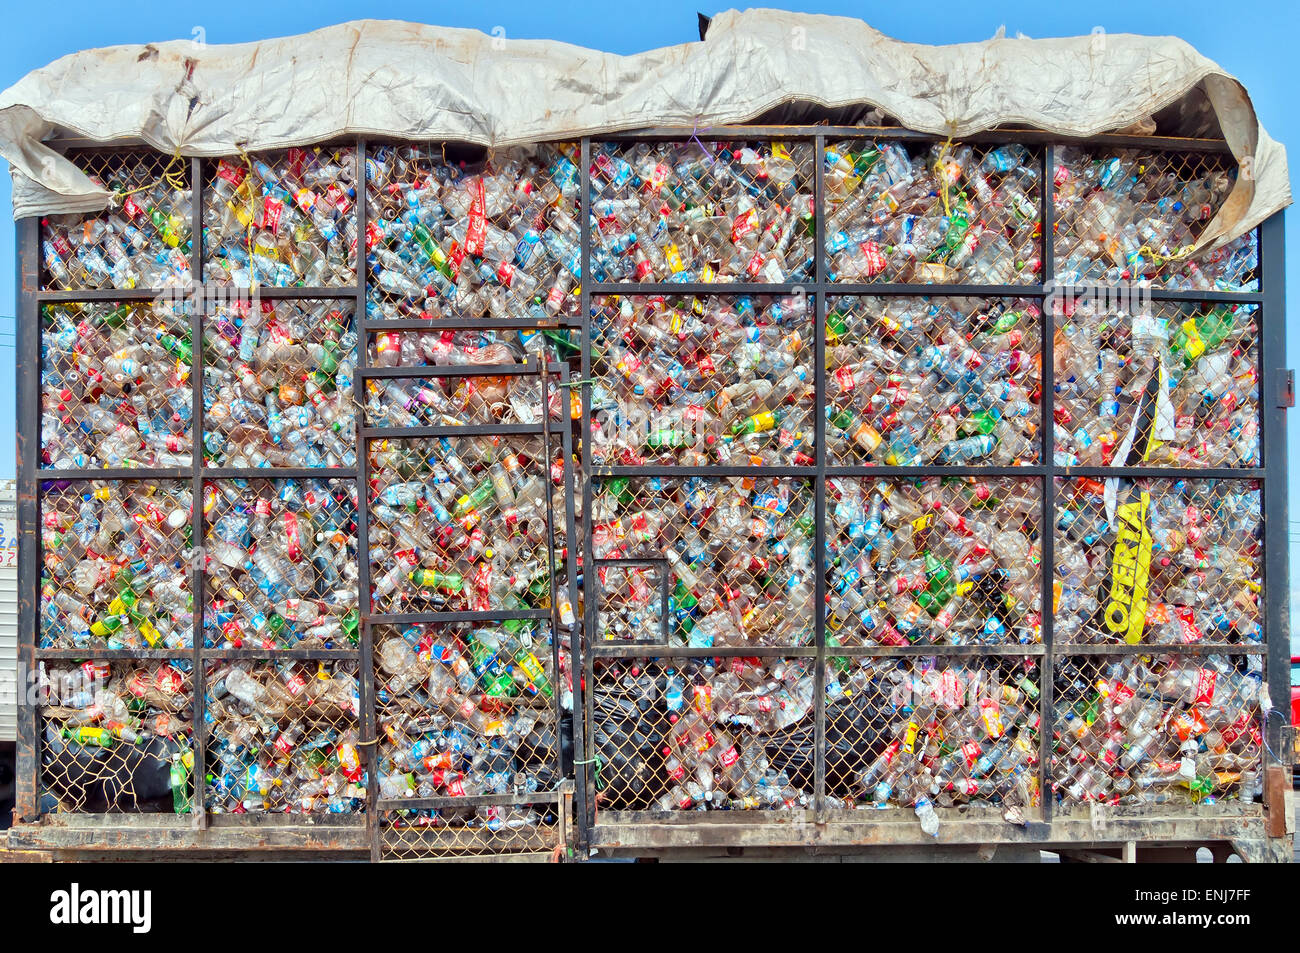 Isla Mujeres, Mexico - April 24, 2014: plastic bottles lie in a heap in a metal cage on a truck in Isla Mujeres, Mexico. Stock Photo